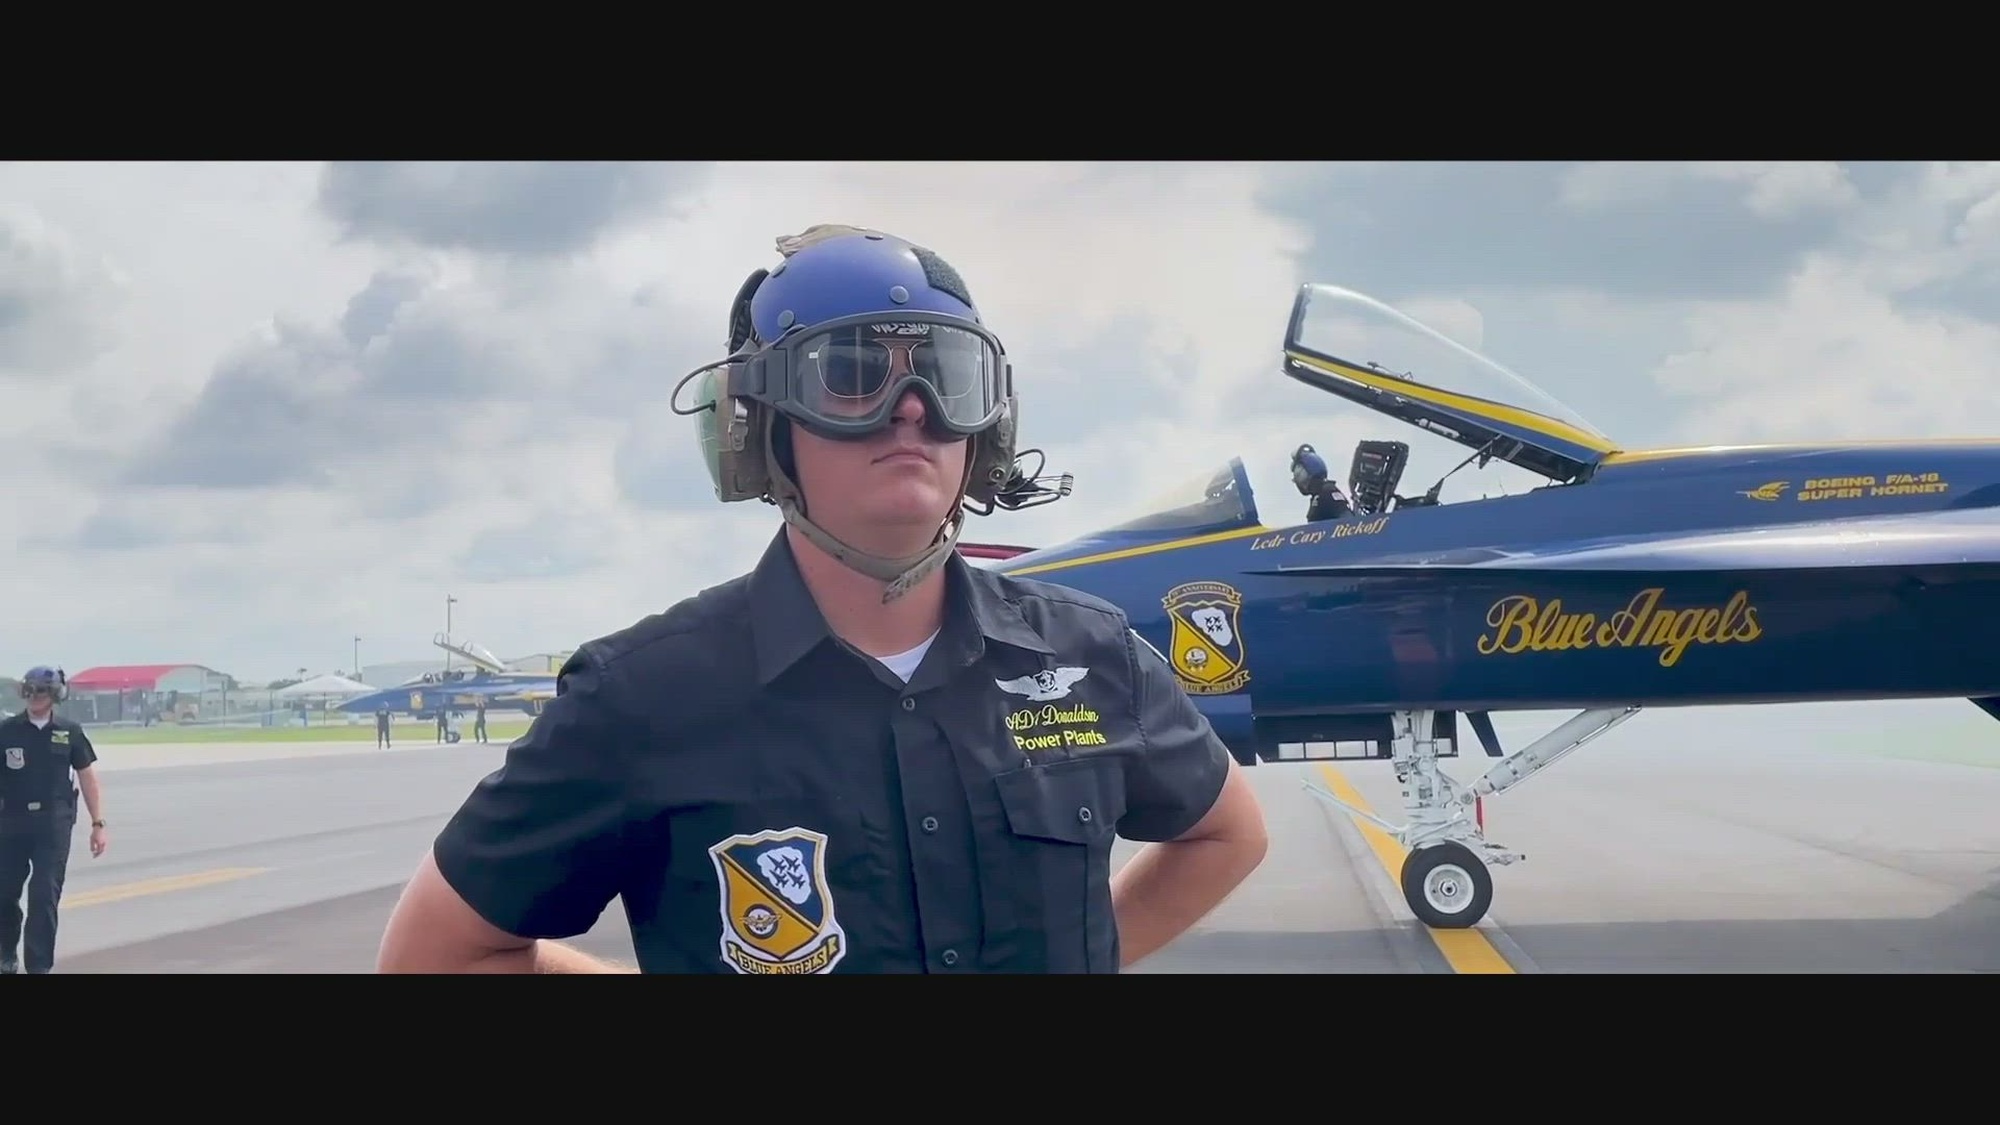 Promotion video for the 2023 Airshow and Stem Expo at Scott Air Force Base